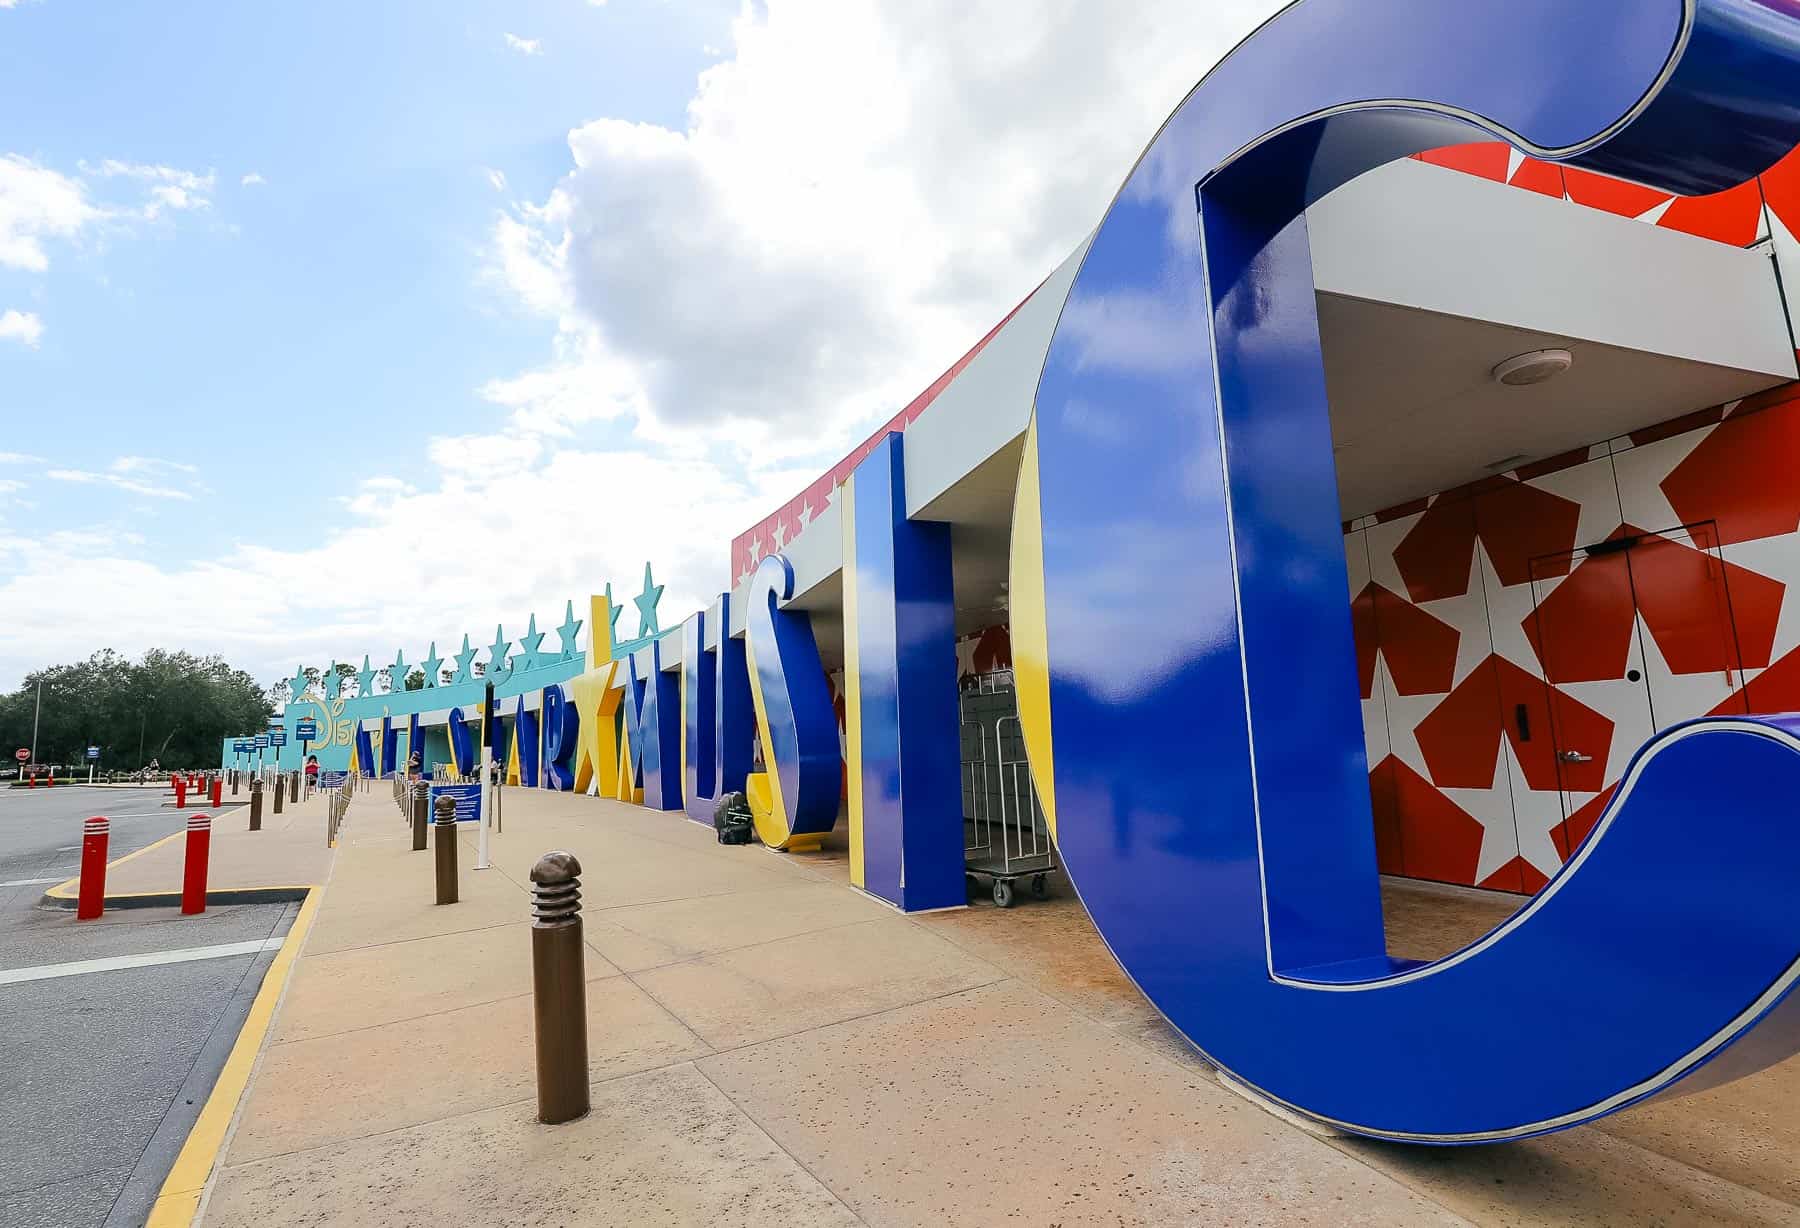 All-Star Music signage at the resort in giant blue letters with a yellow star